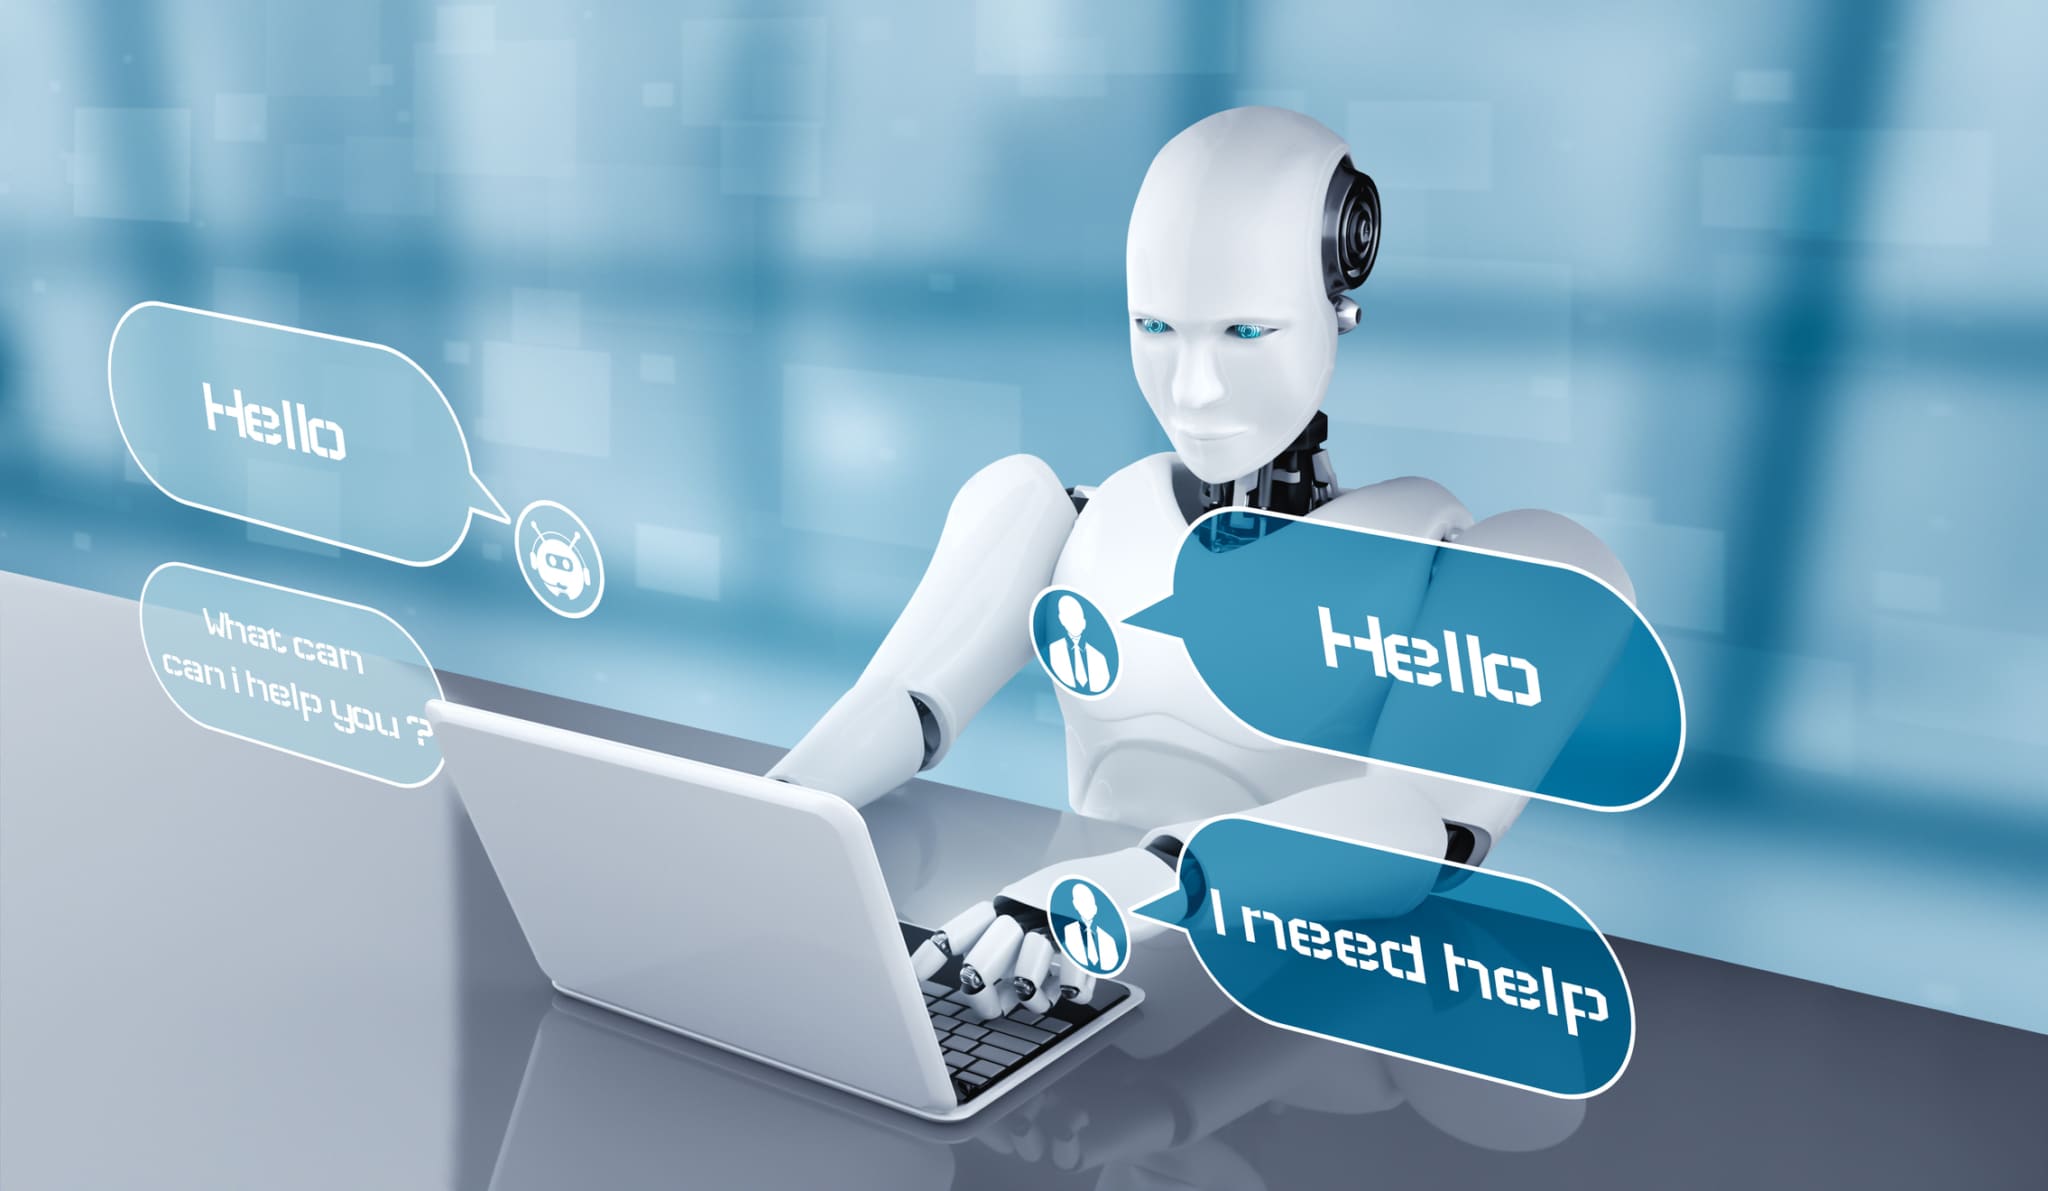 ai-robot-using-computer-to-chat-with-customer-concept-of-chat-bot-scaled